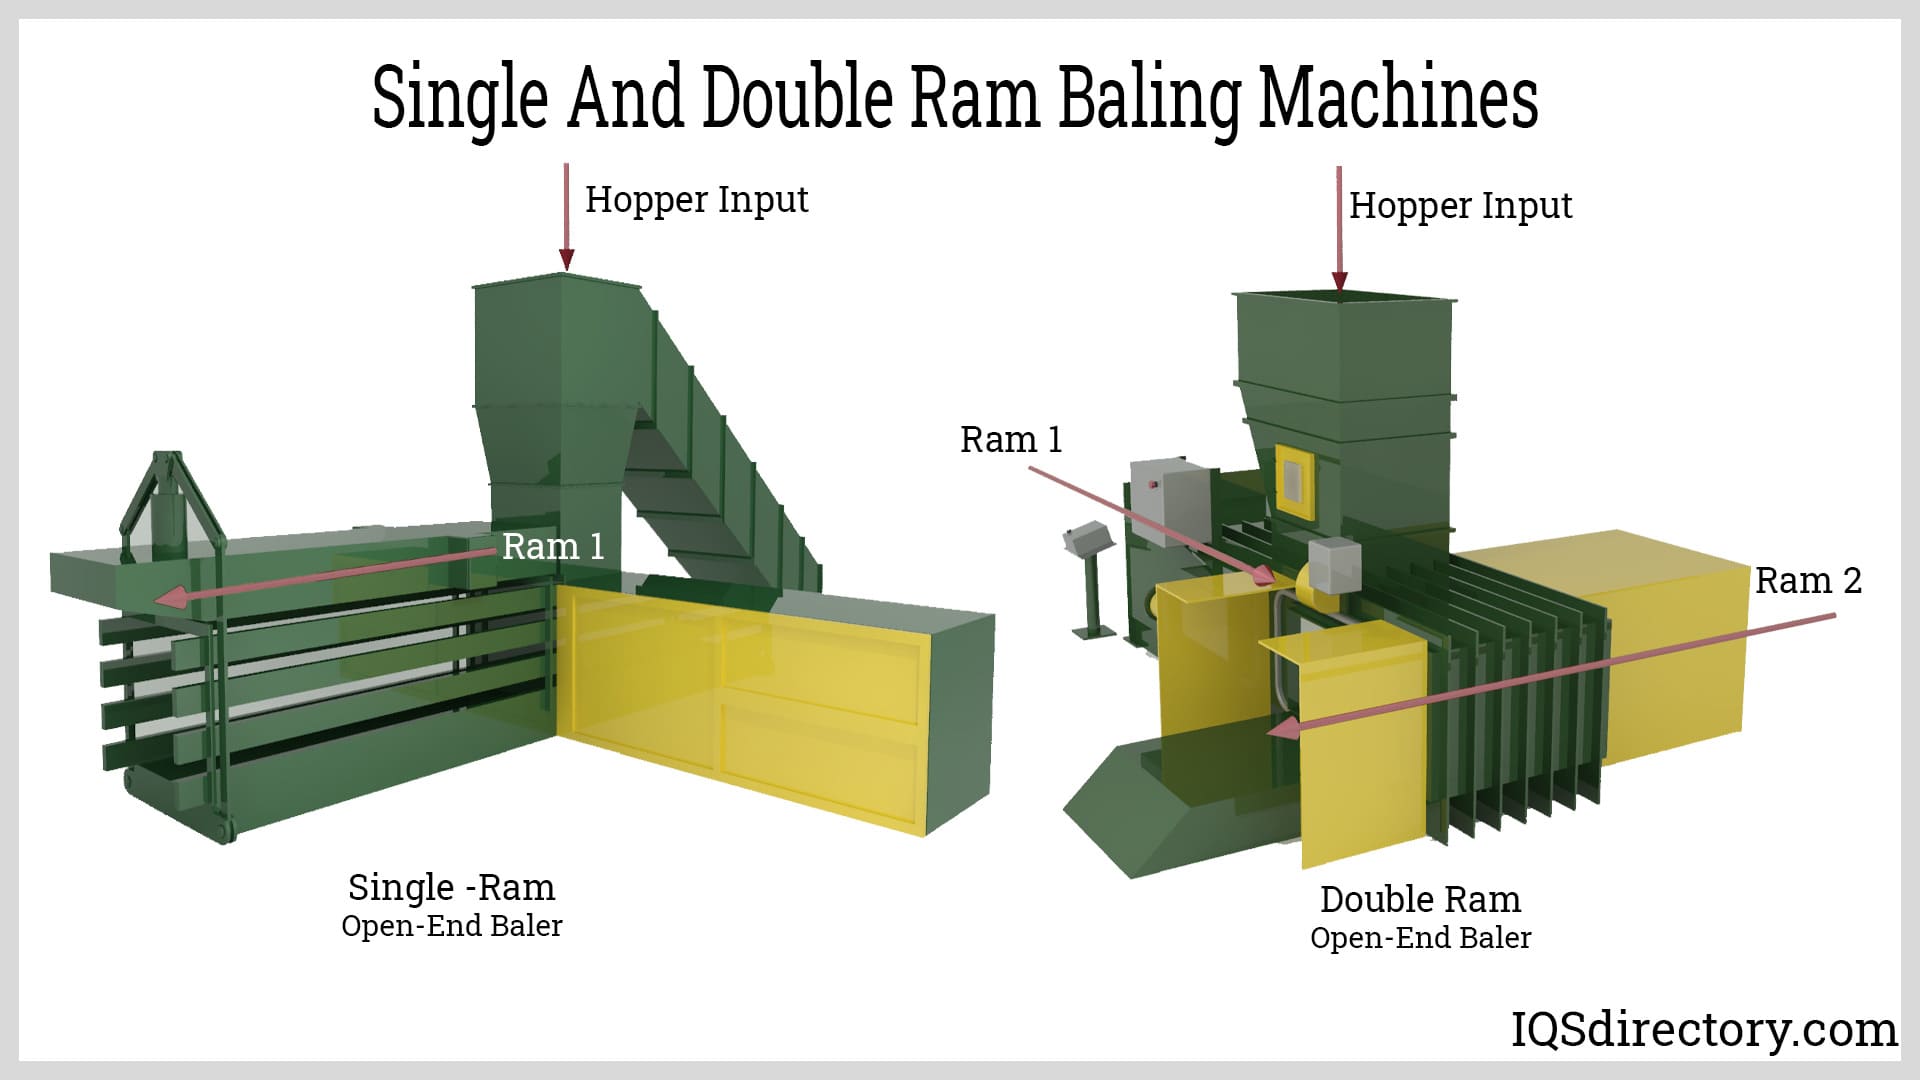 Single and Double Ram Baling Machines